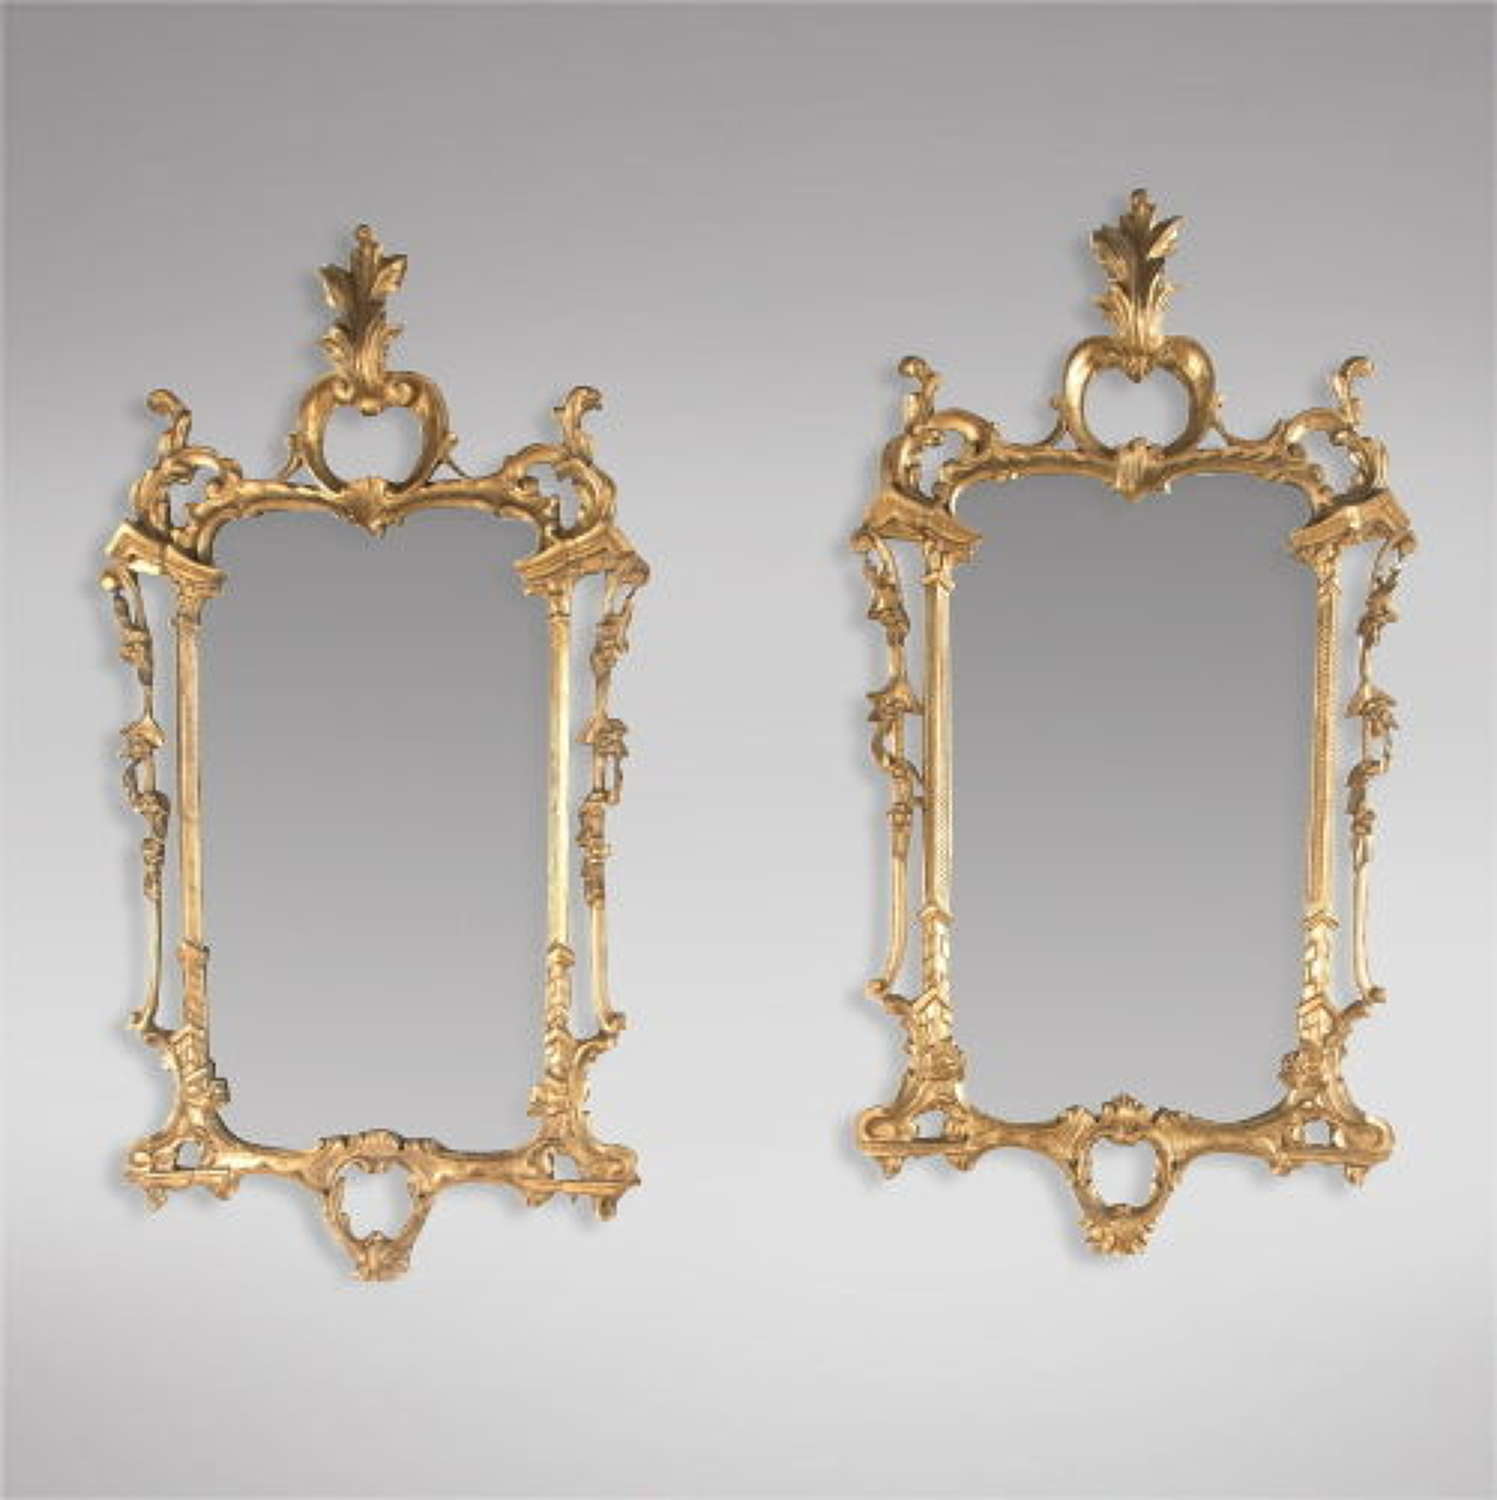 Pair of Italian Florentine Carved Giltwood Wall Mirrors